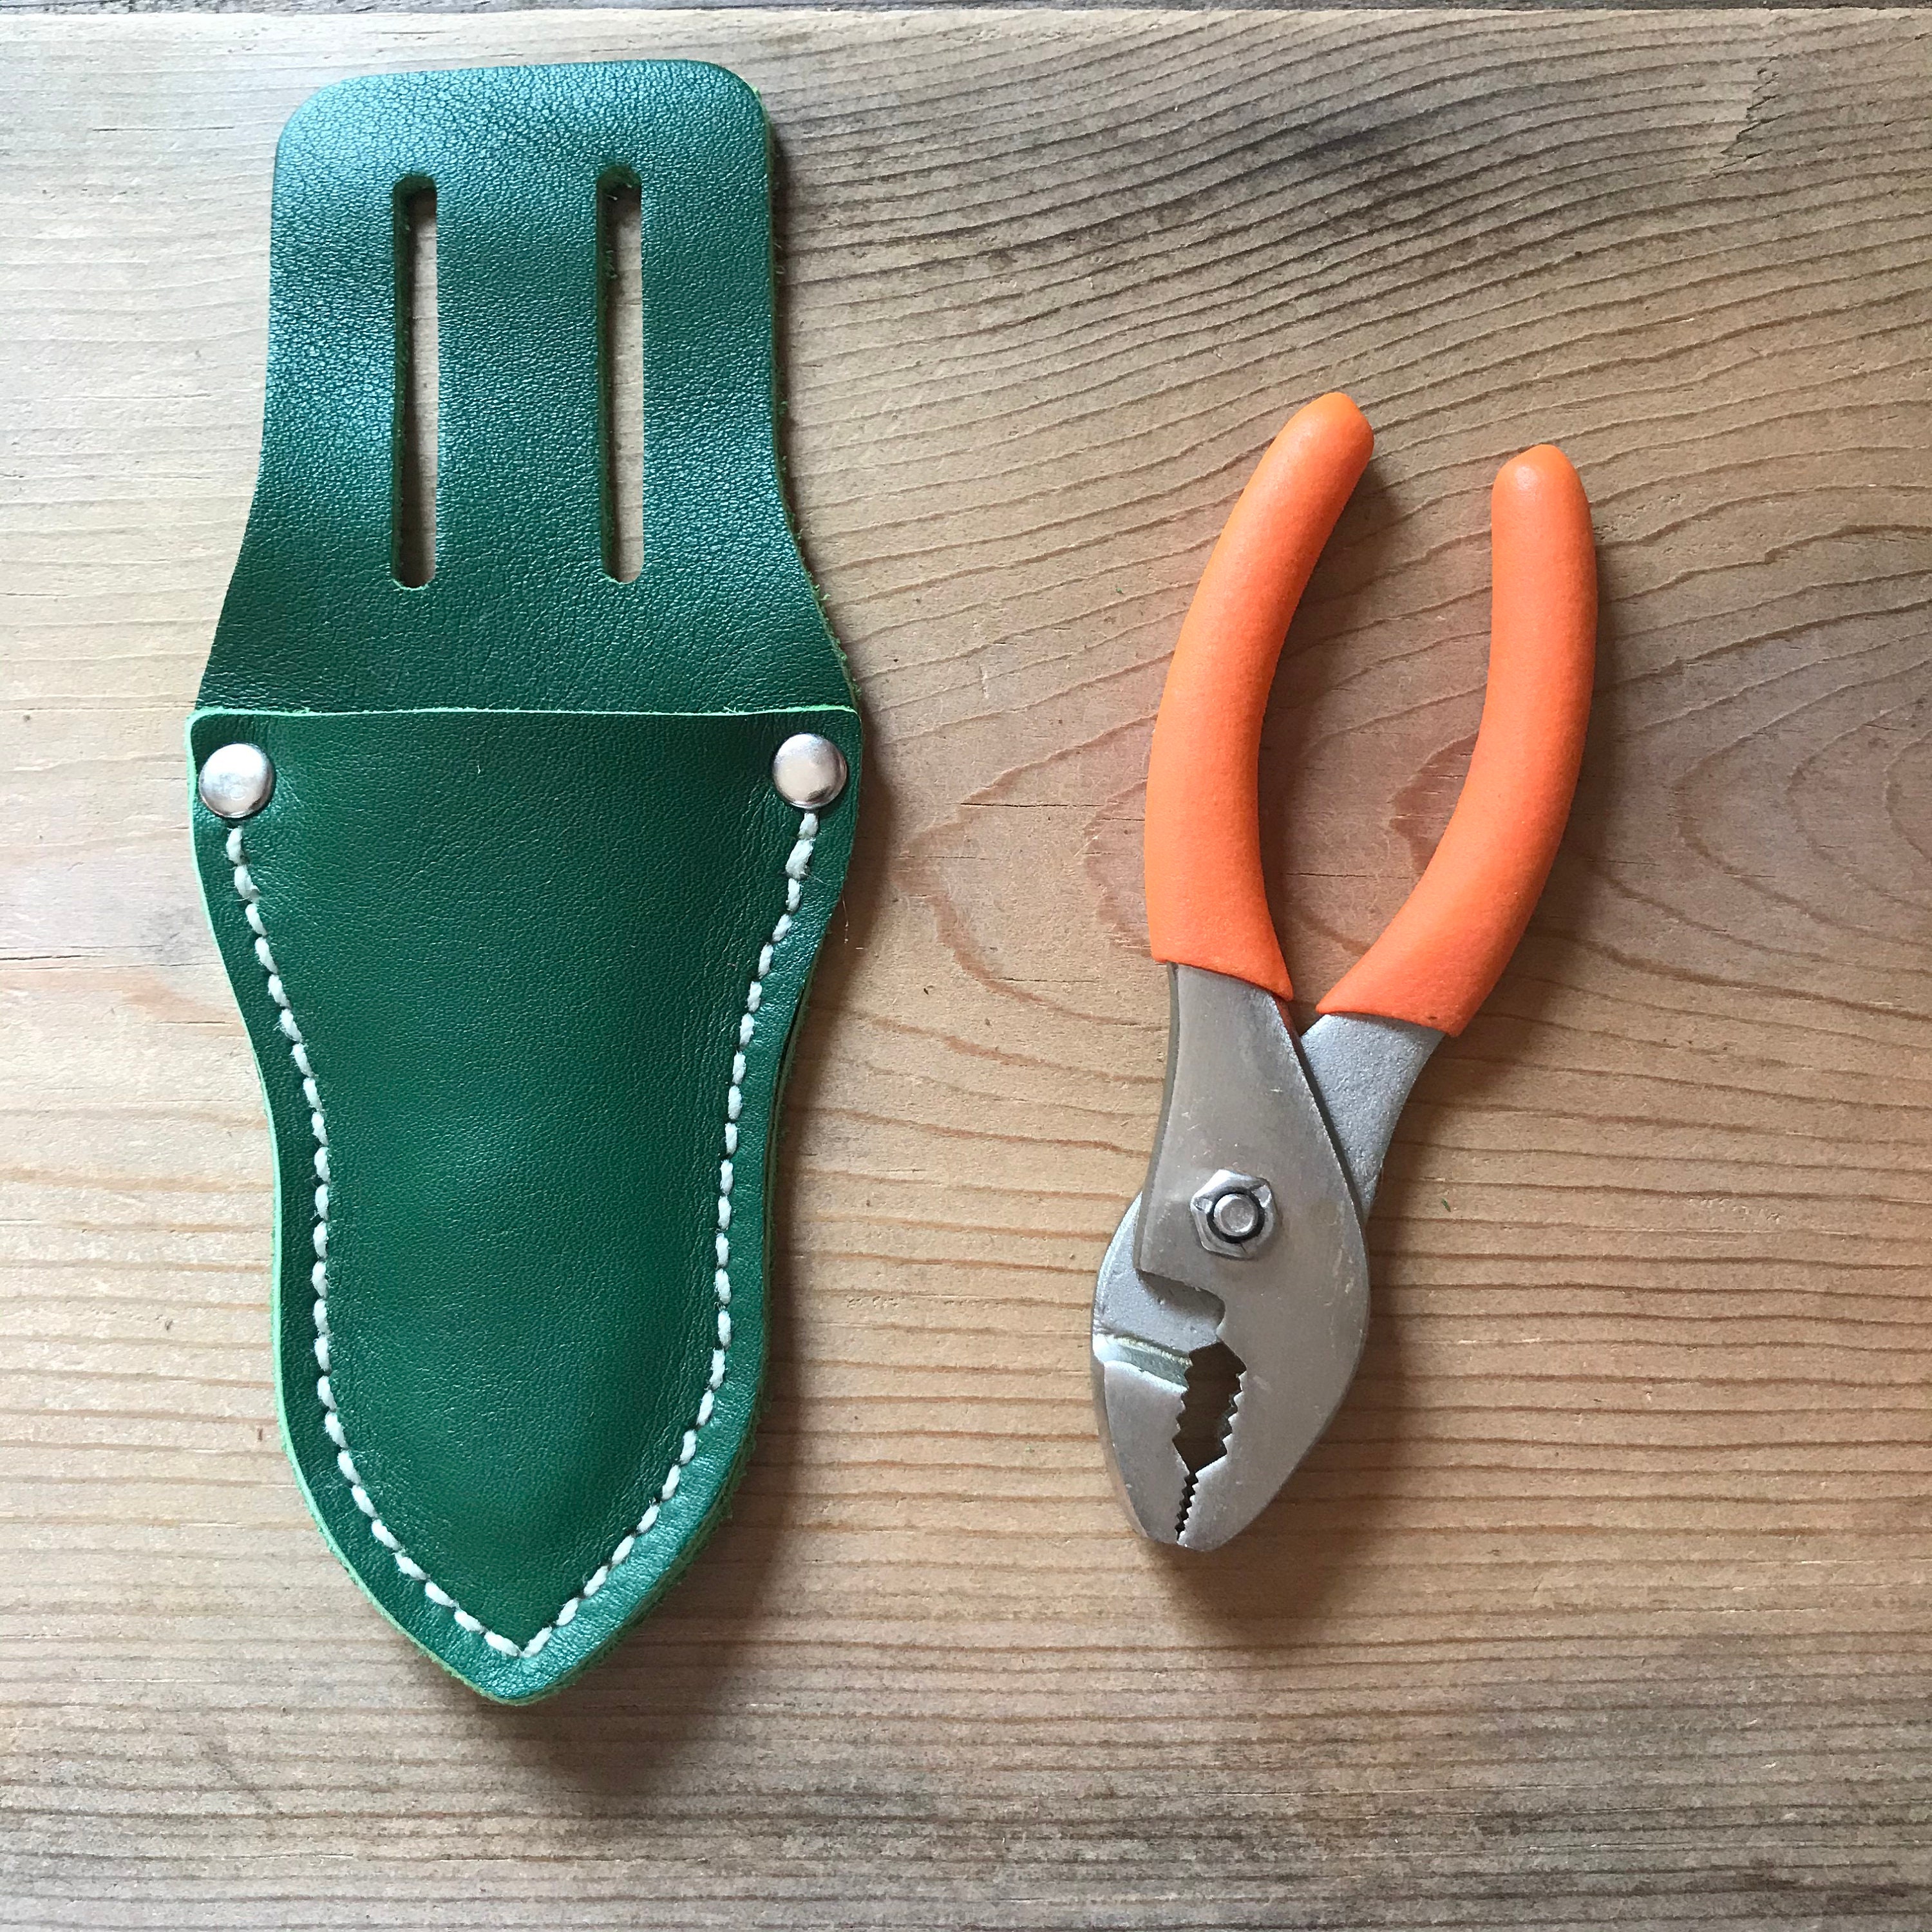 Kids Leather 4 Plier Holster Personalization Available Leather Plier Holder  With 4 Inch Pliers Pretend Play Gift for Kids Toy Tool 